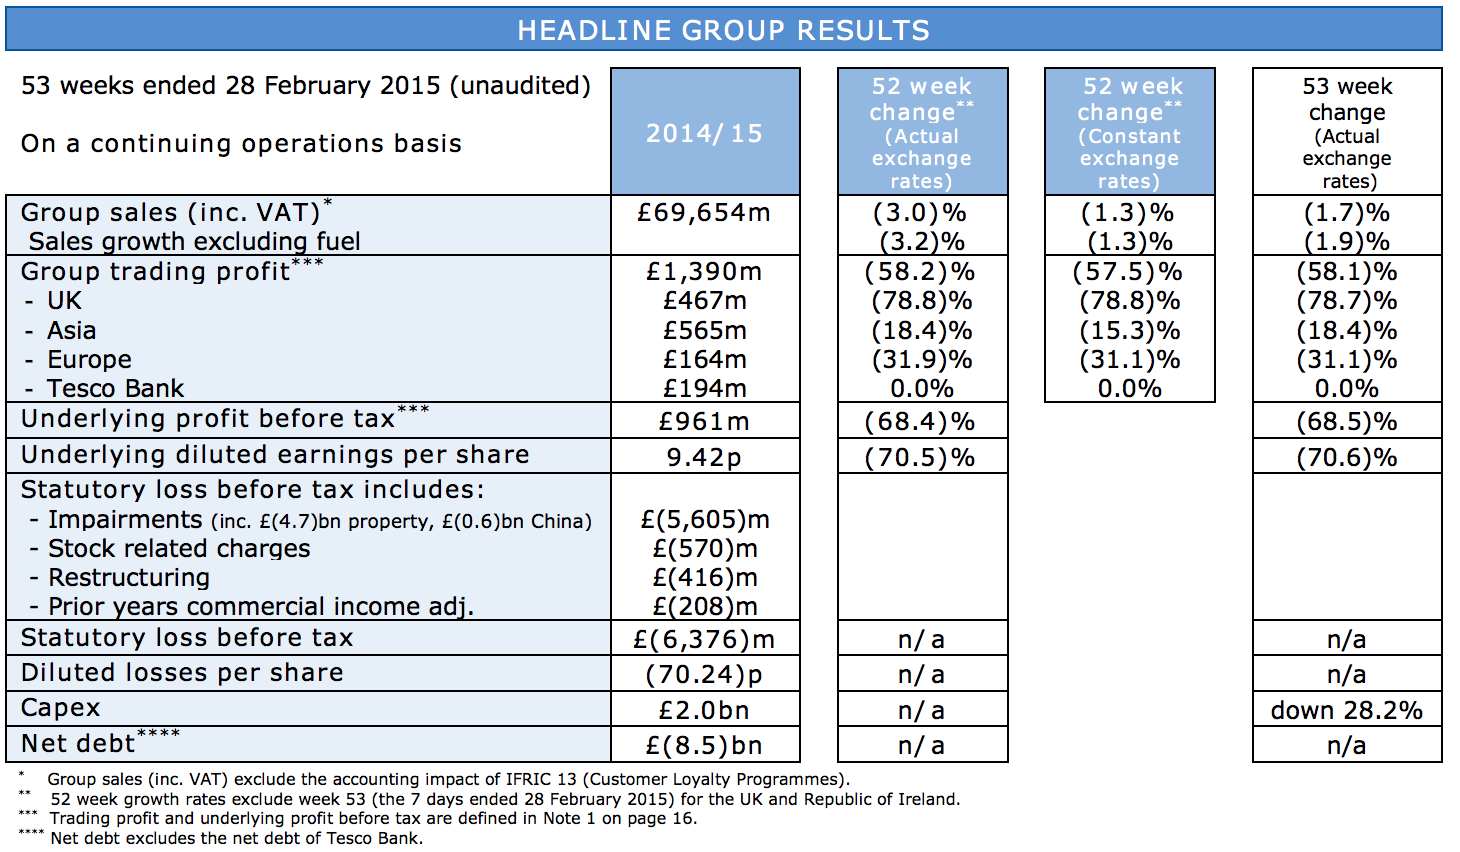 Tesco Fiscal 2014/15 results